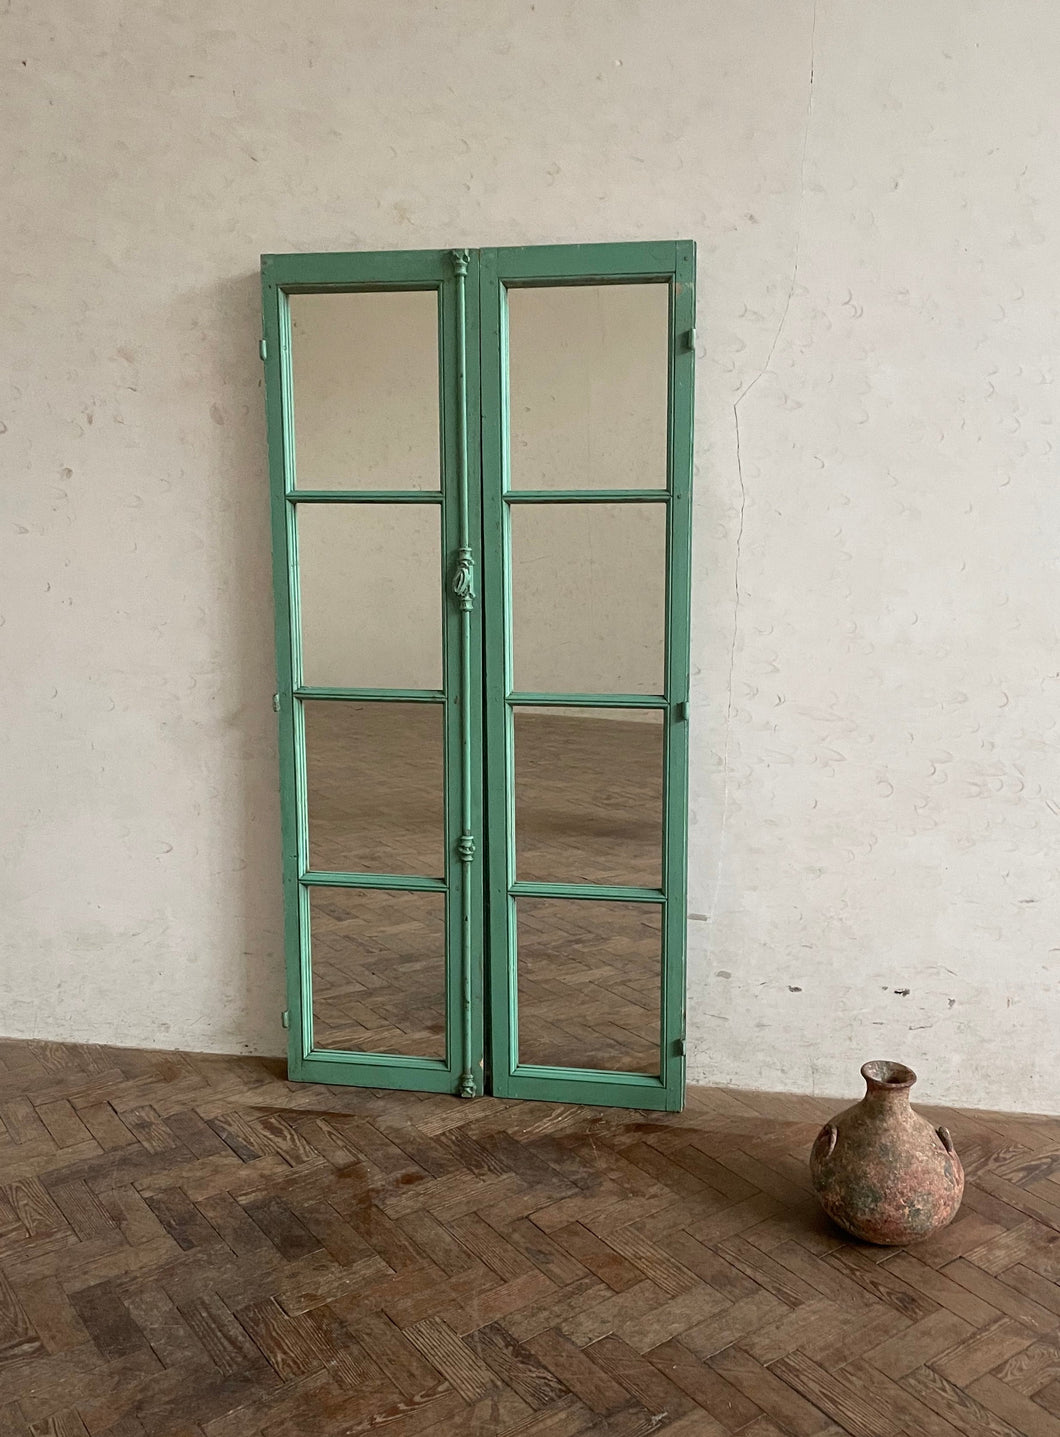 Antique French Mirrored Doors